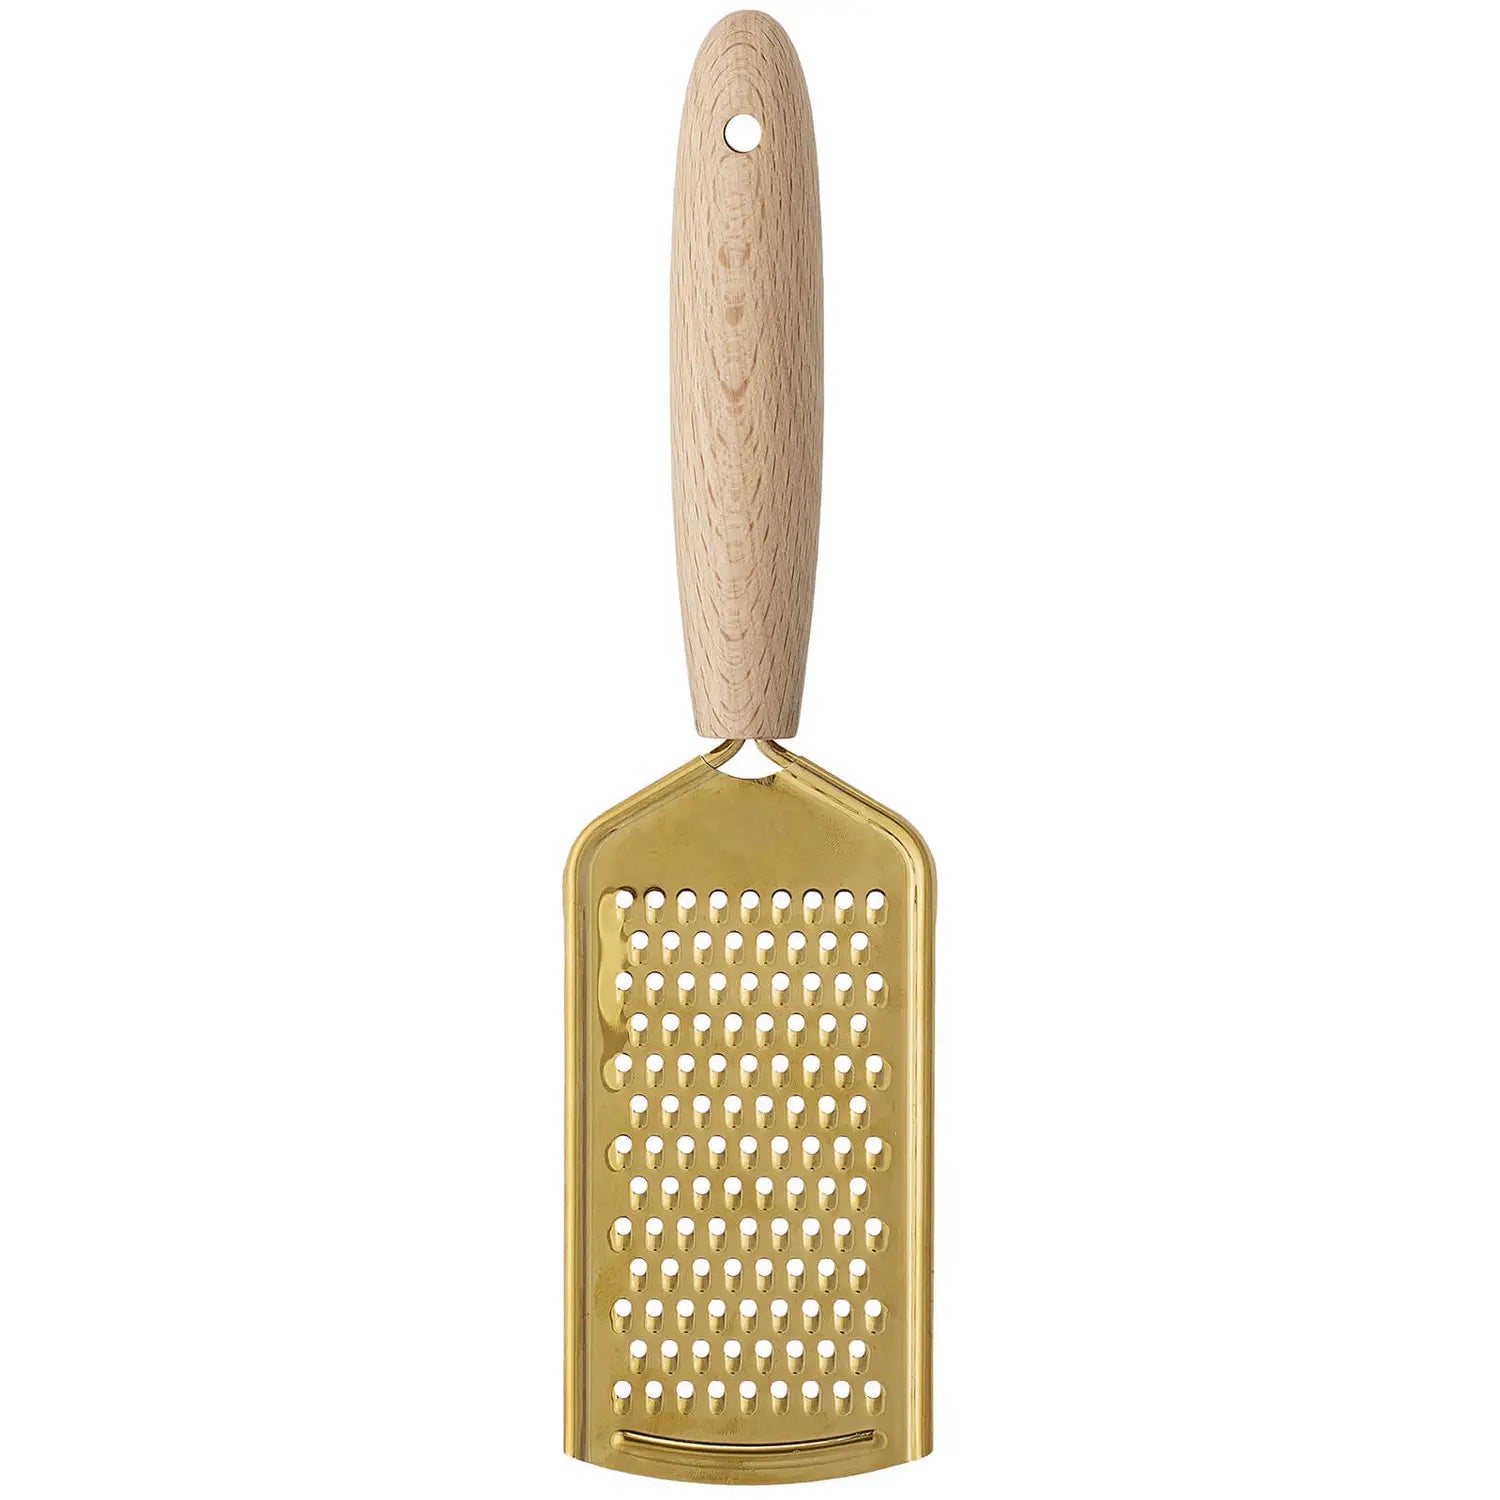 Brass Cheese Grater with Wood Handle – IntuitionMurray